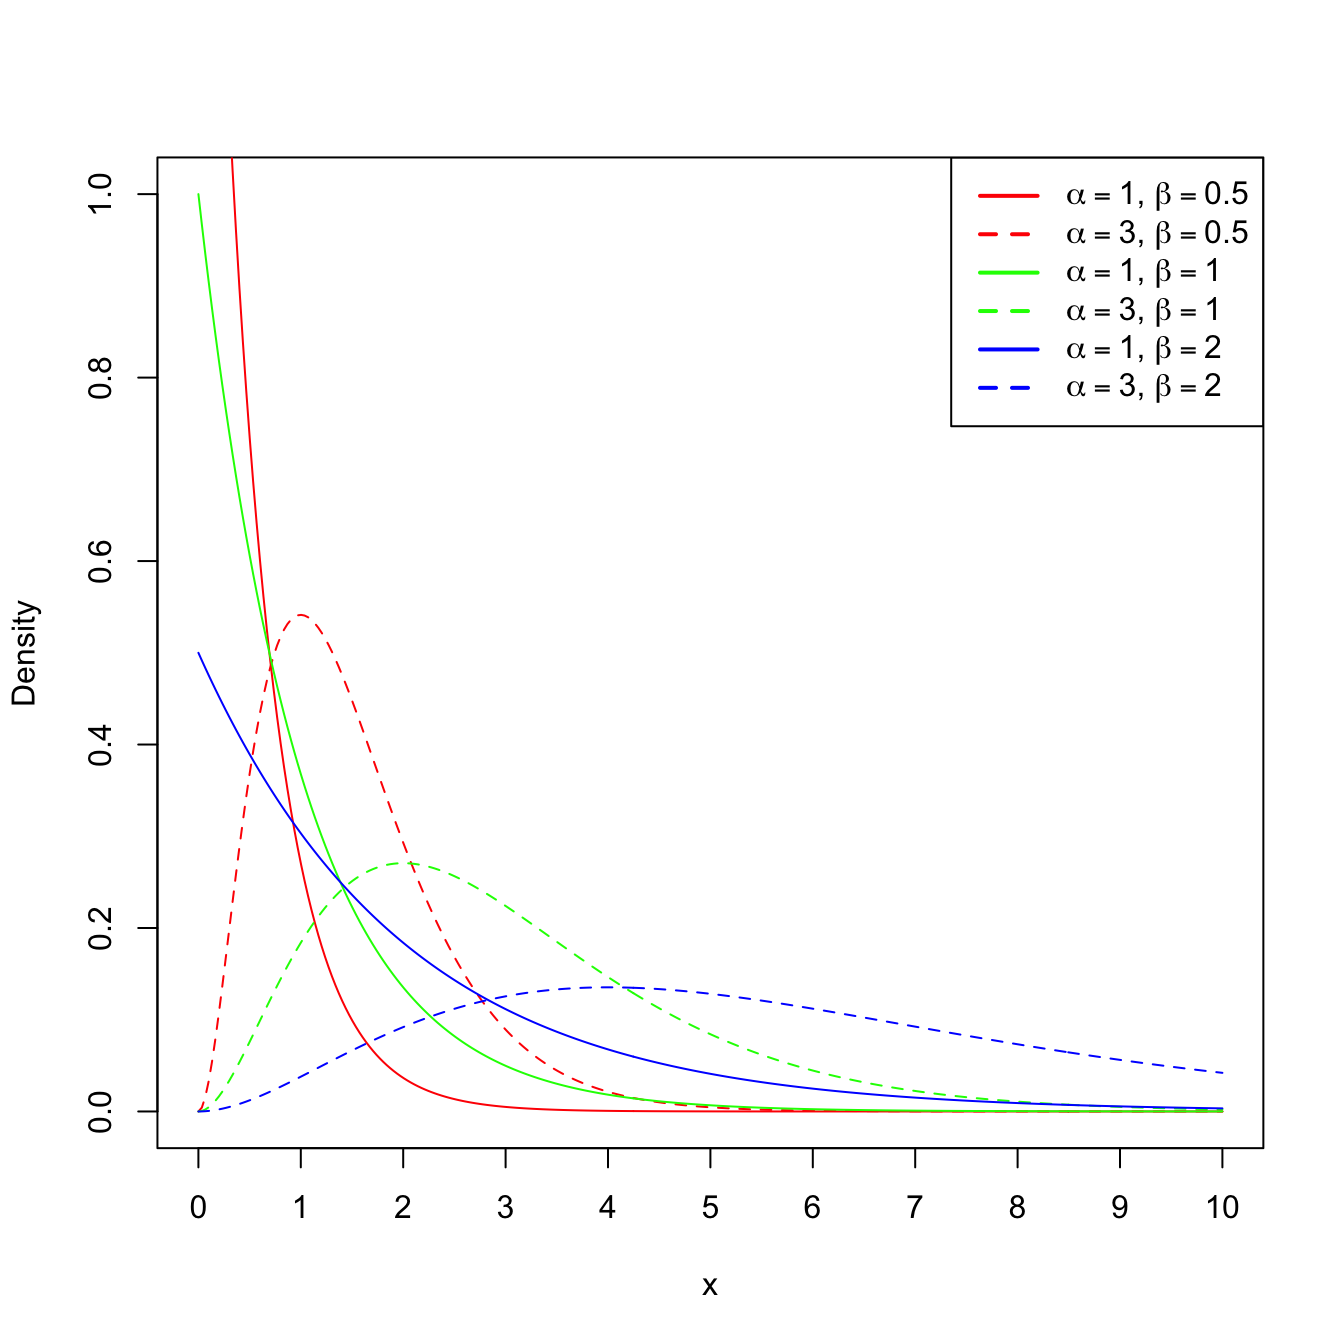 \(\Gamma(\alpha,\beta)\) pdf’s and mgf’s for several shapes \(\alpha\) and scales \(\beta.\) The dotted vertical lines represent the value \(s=1/\beta.\)